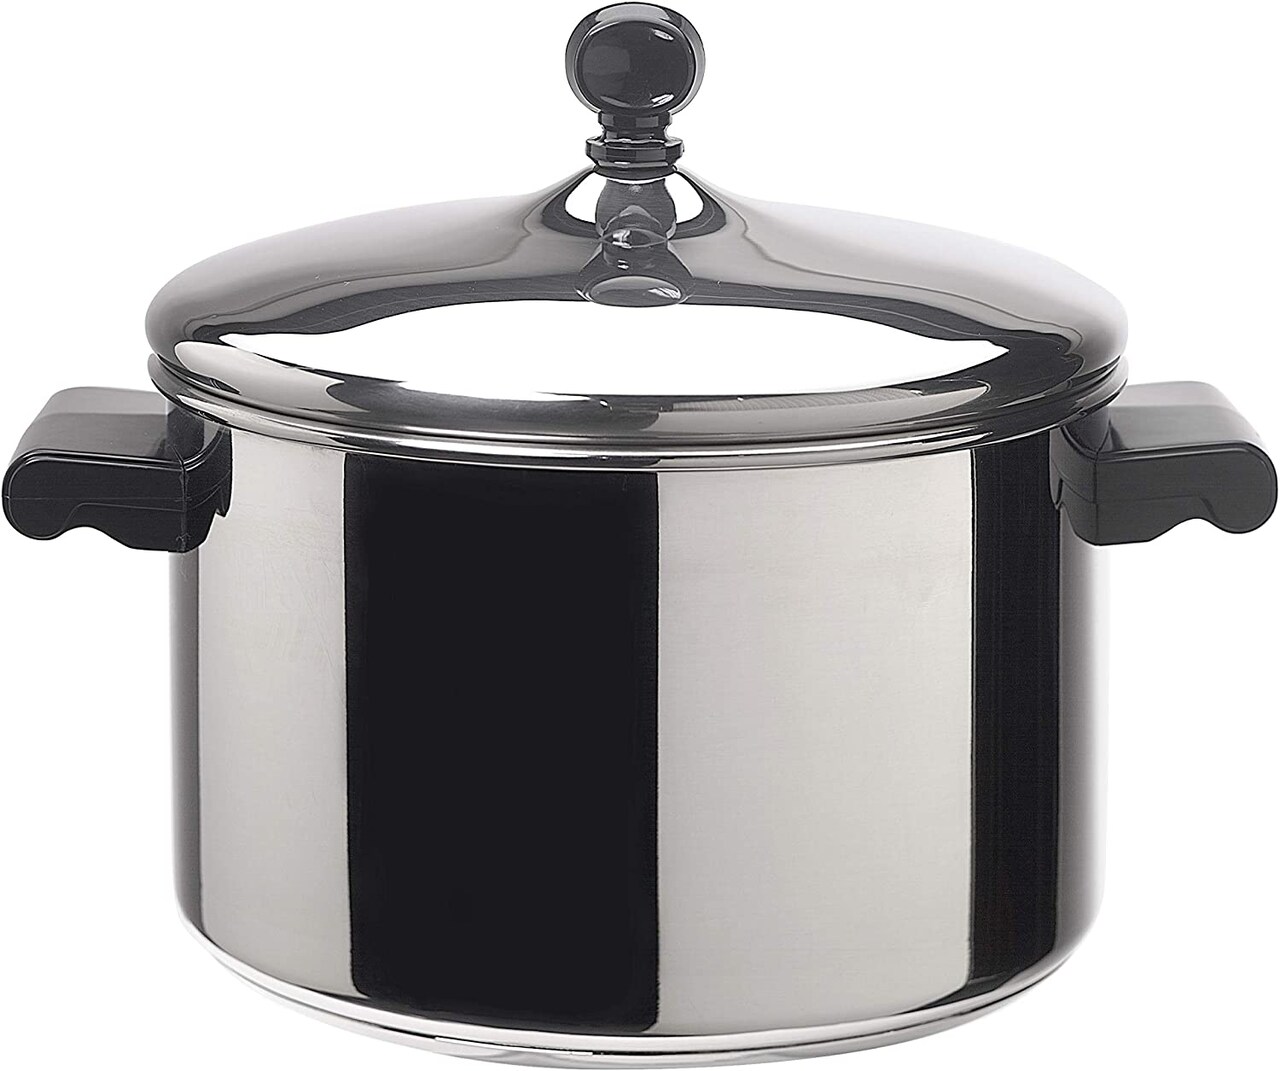 Farberware 12-Piece Classic Traditions Stainless Steel Pots and